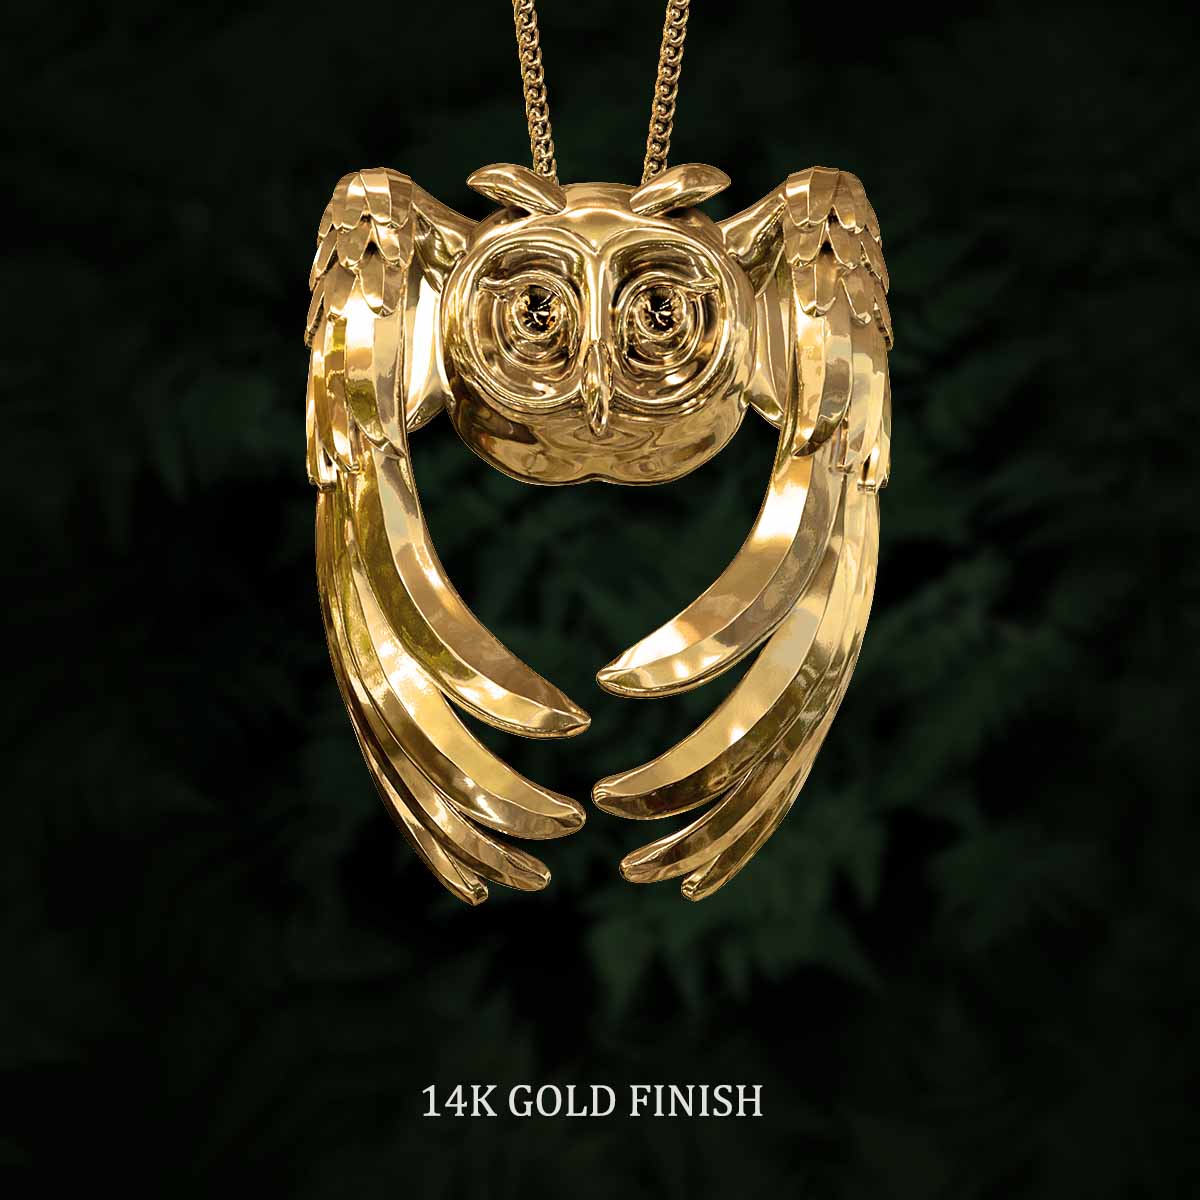 14k-Gold-Finish-Owl-Pendant-Jewelry-For-Necklace